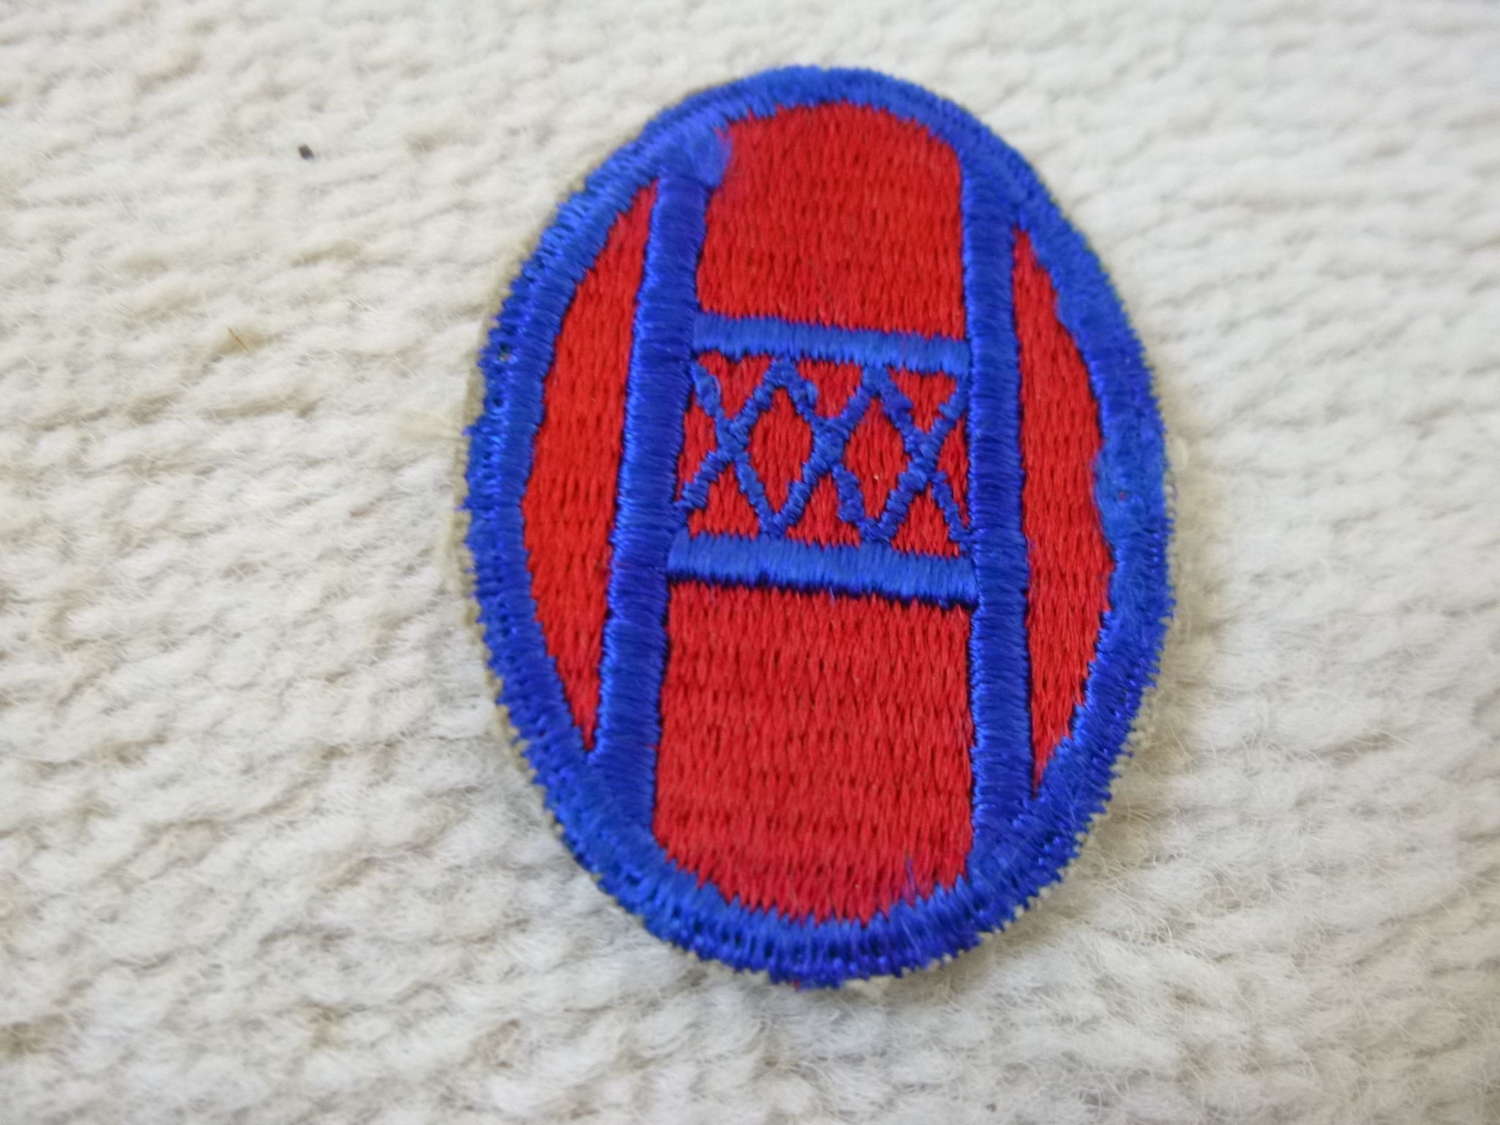 US army 30th infantry division patch